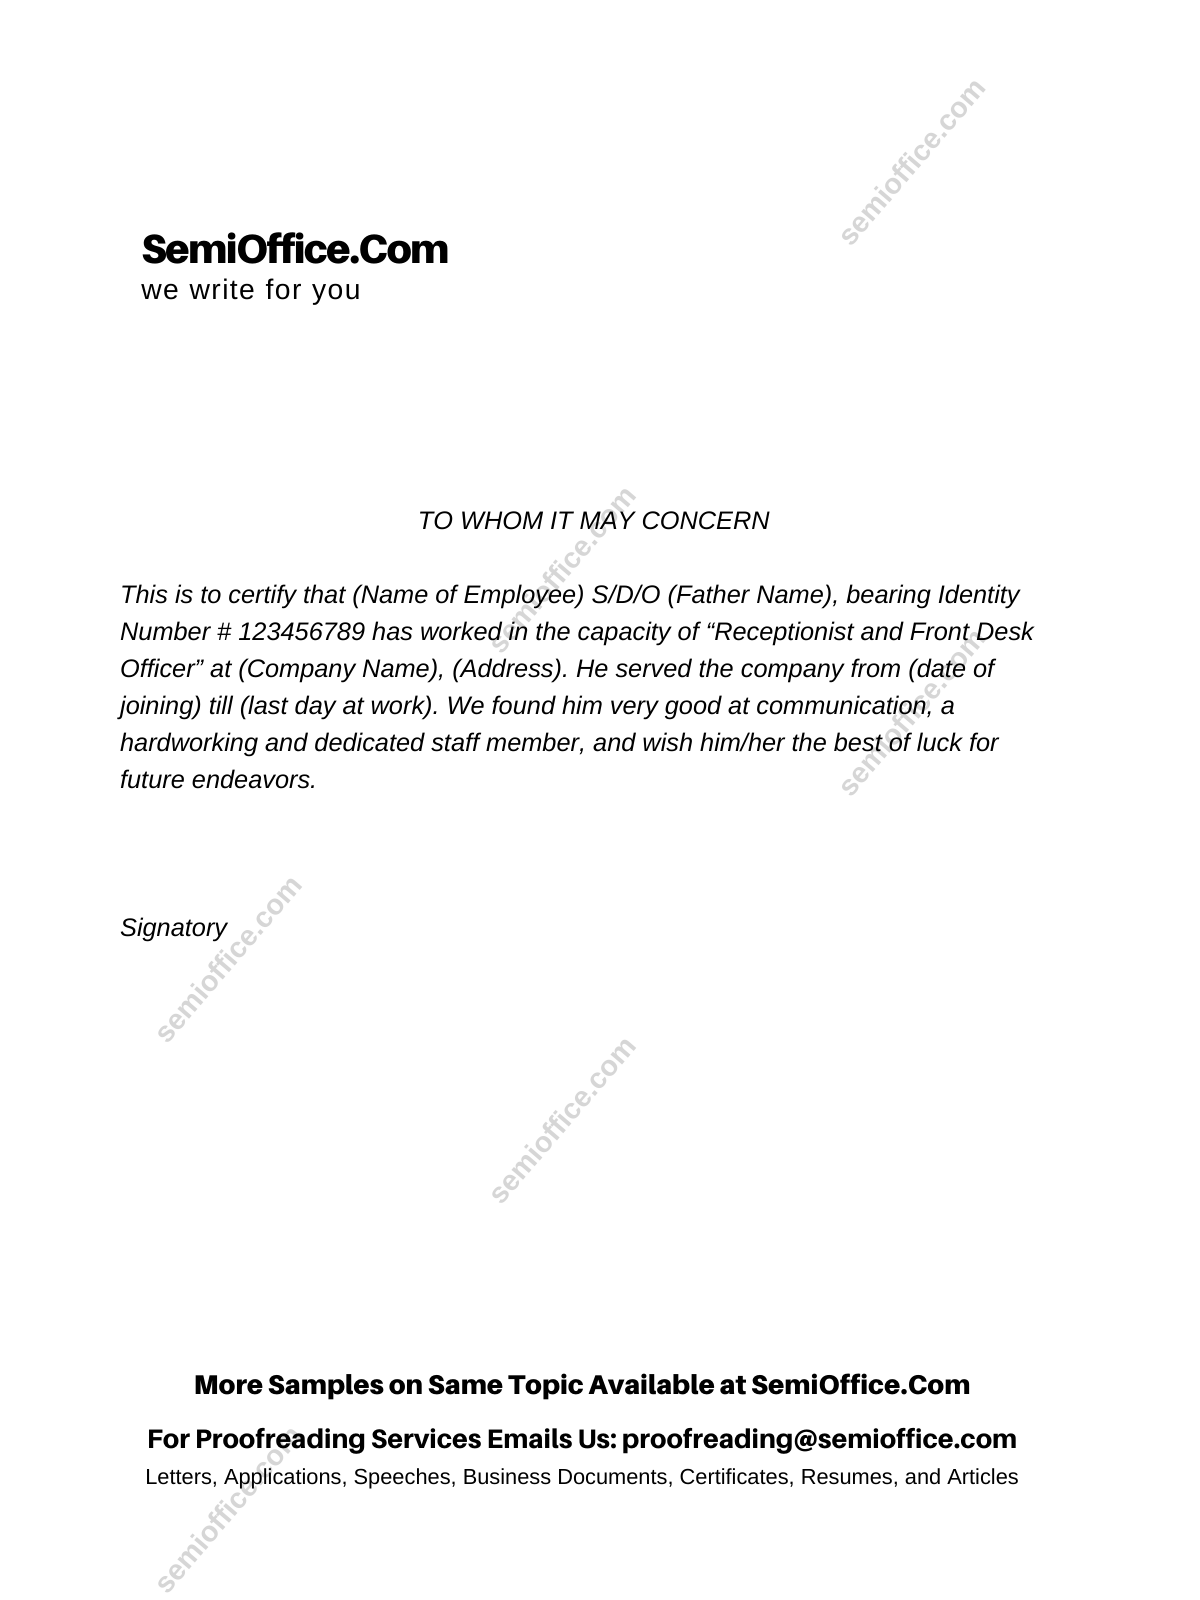 Experience Letter For Receptionist Free Sample  SemiOffice